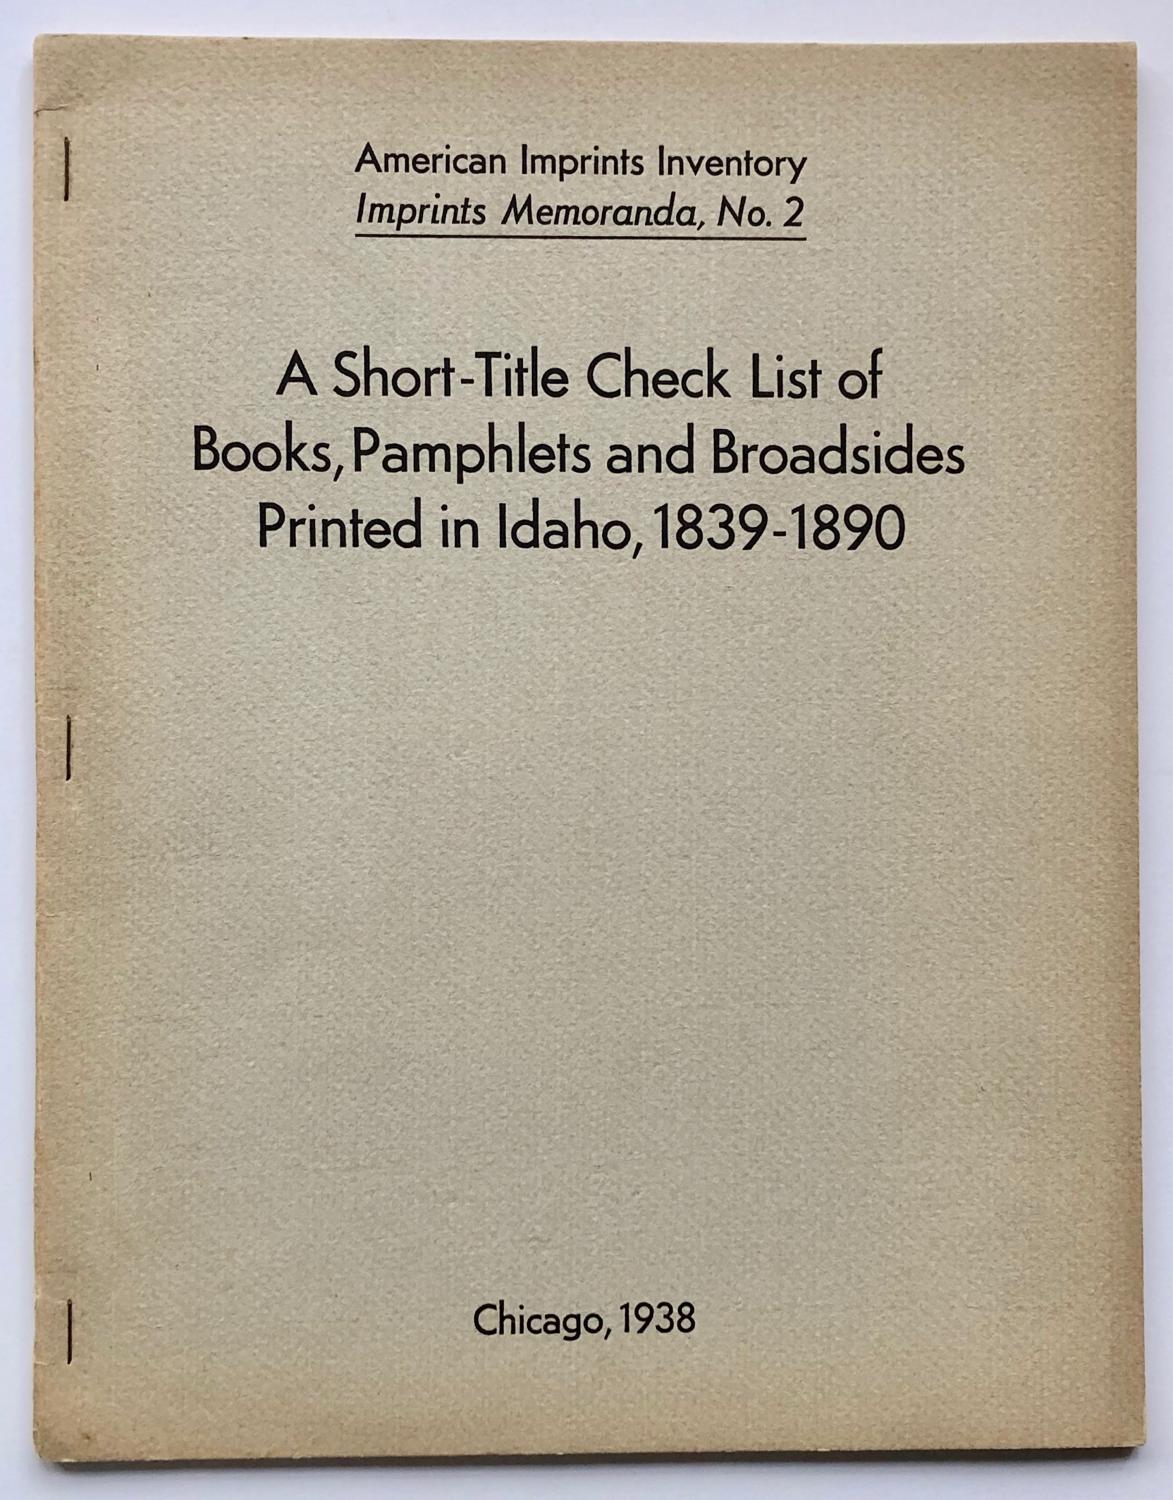 A short-title check list of books, pamphlets, and broadsides printed in Idaho, 1839-1890 (book cover)